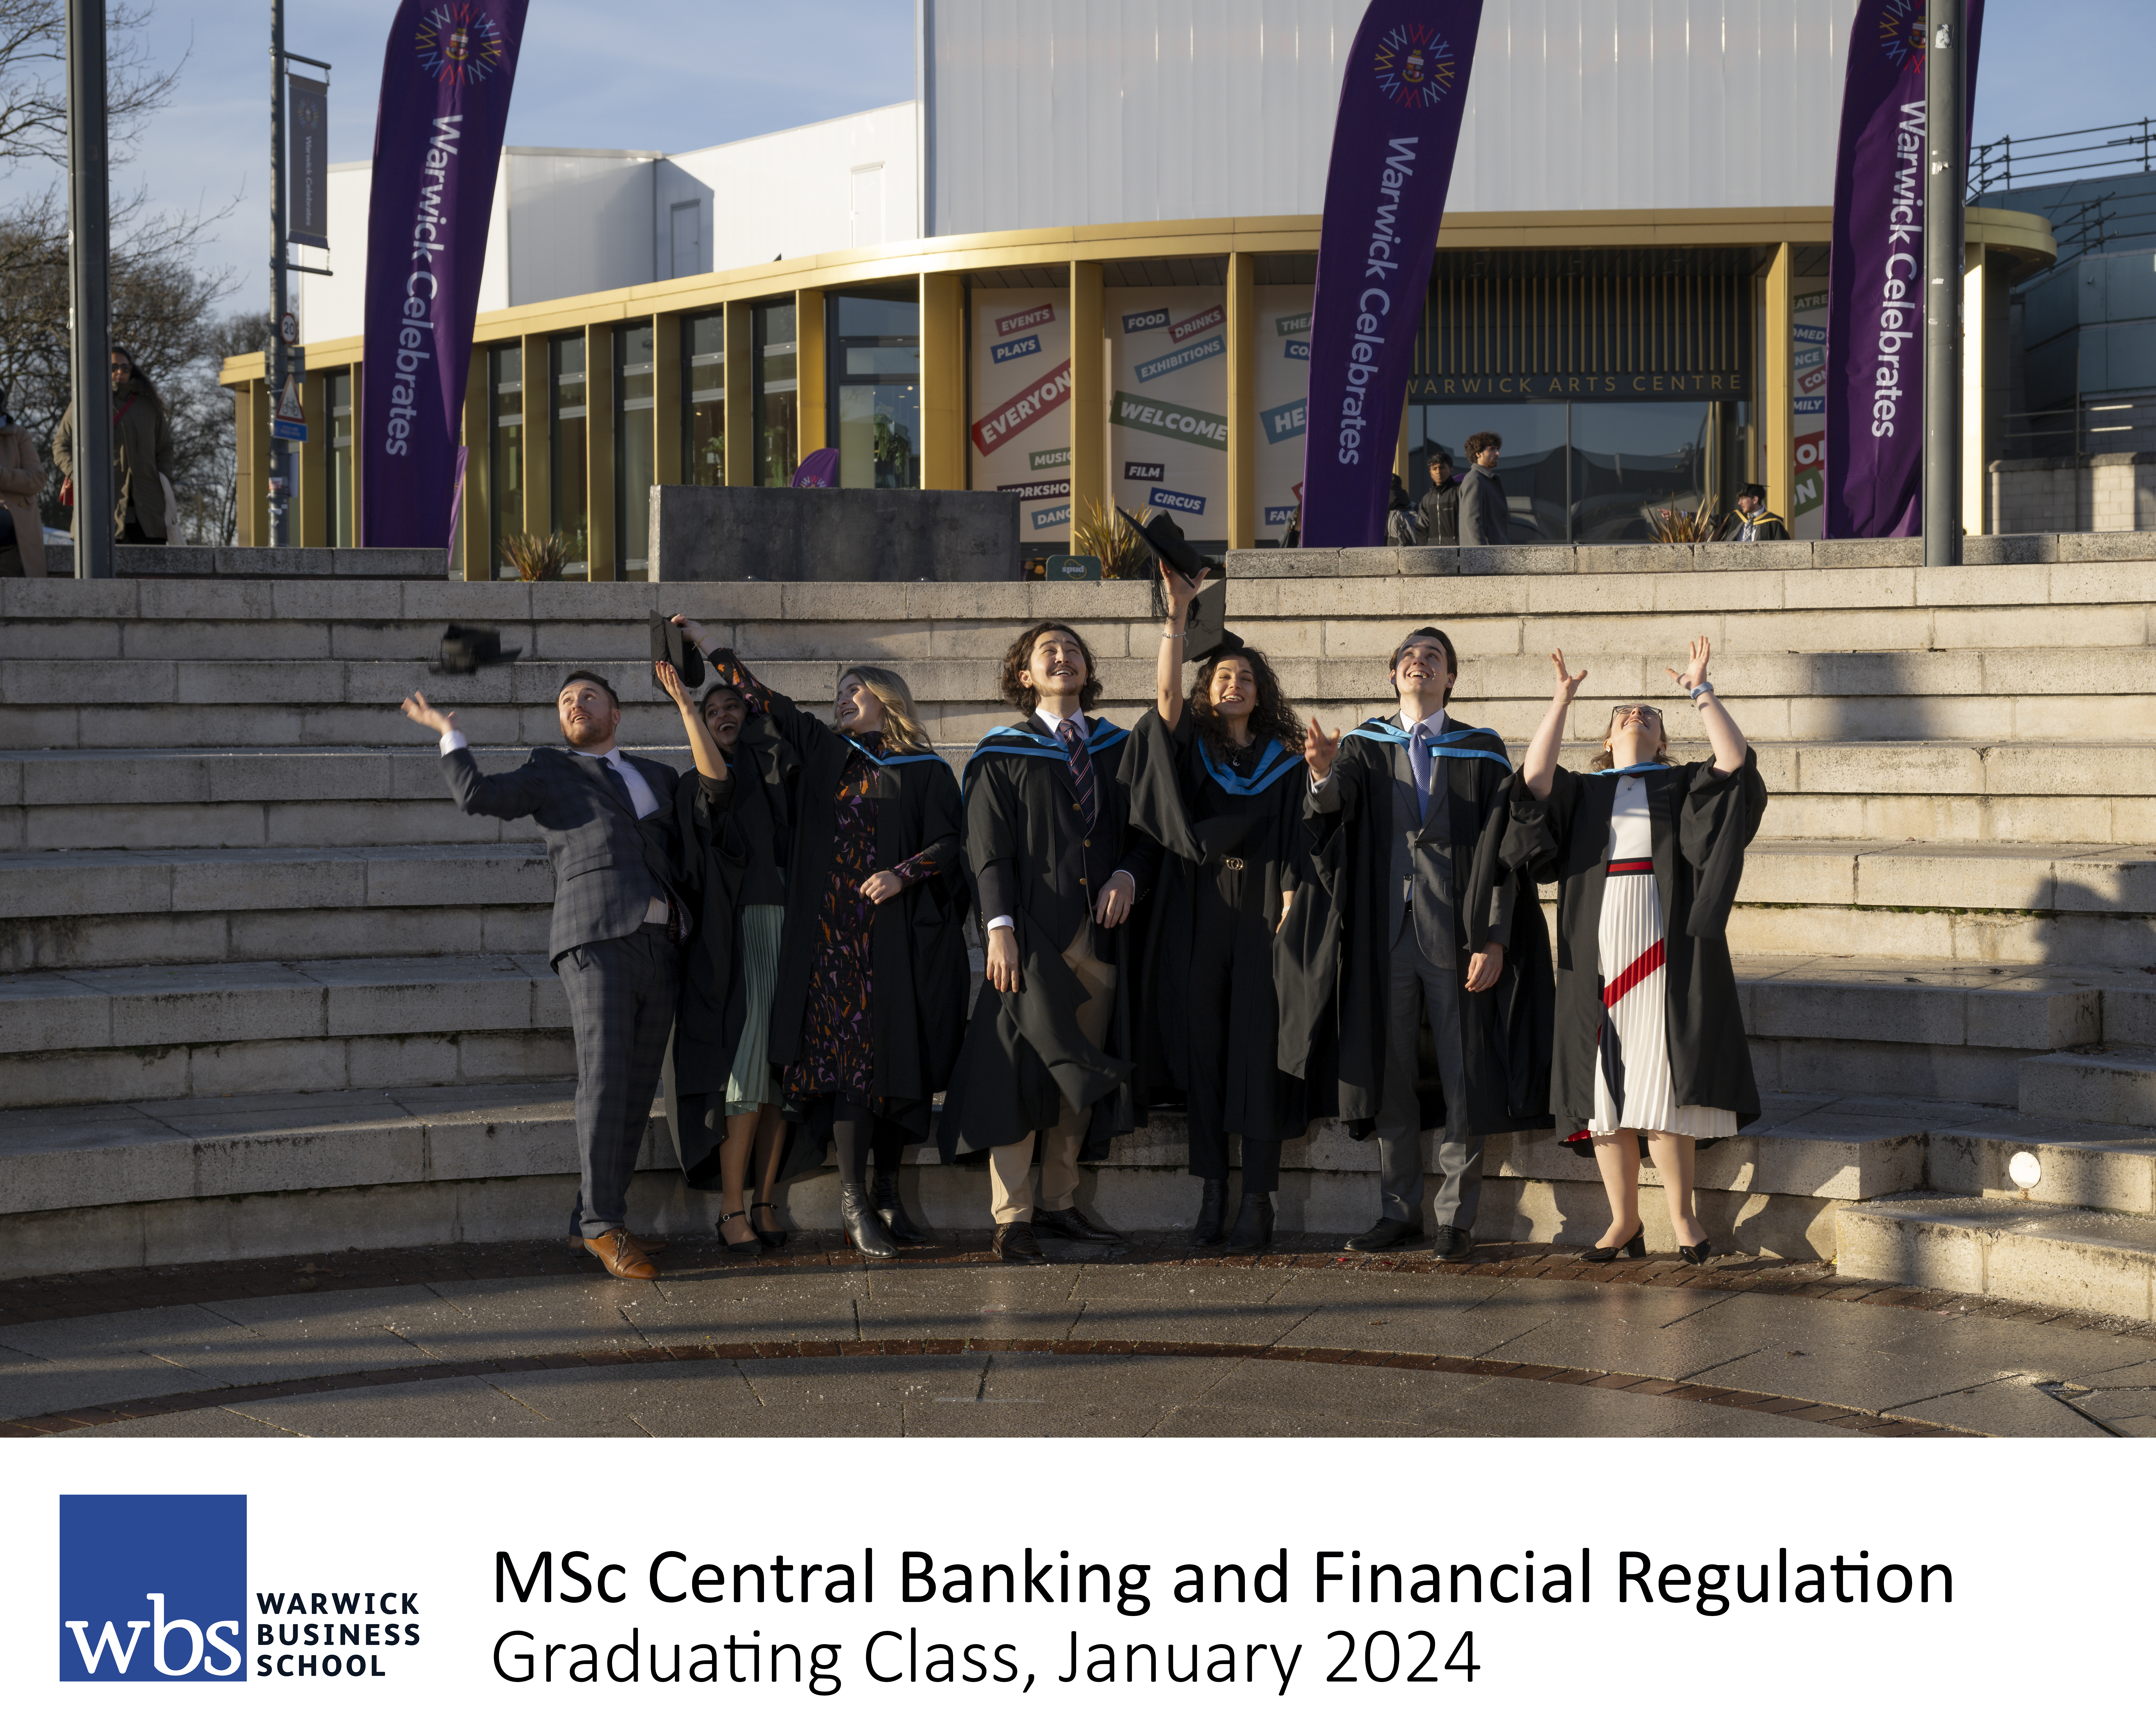 wbs_grad_jan24_-_msc_central_banking_and_financial_regulation_hats_2_captioned.jpg